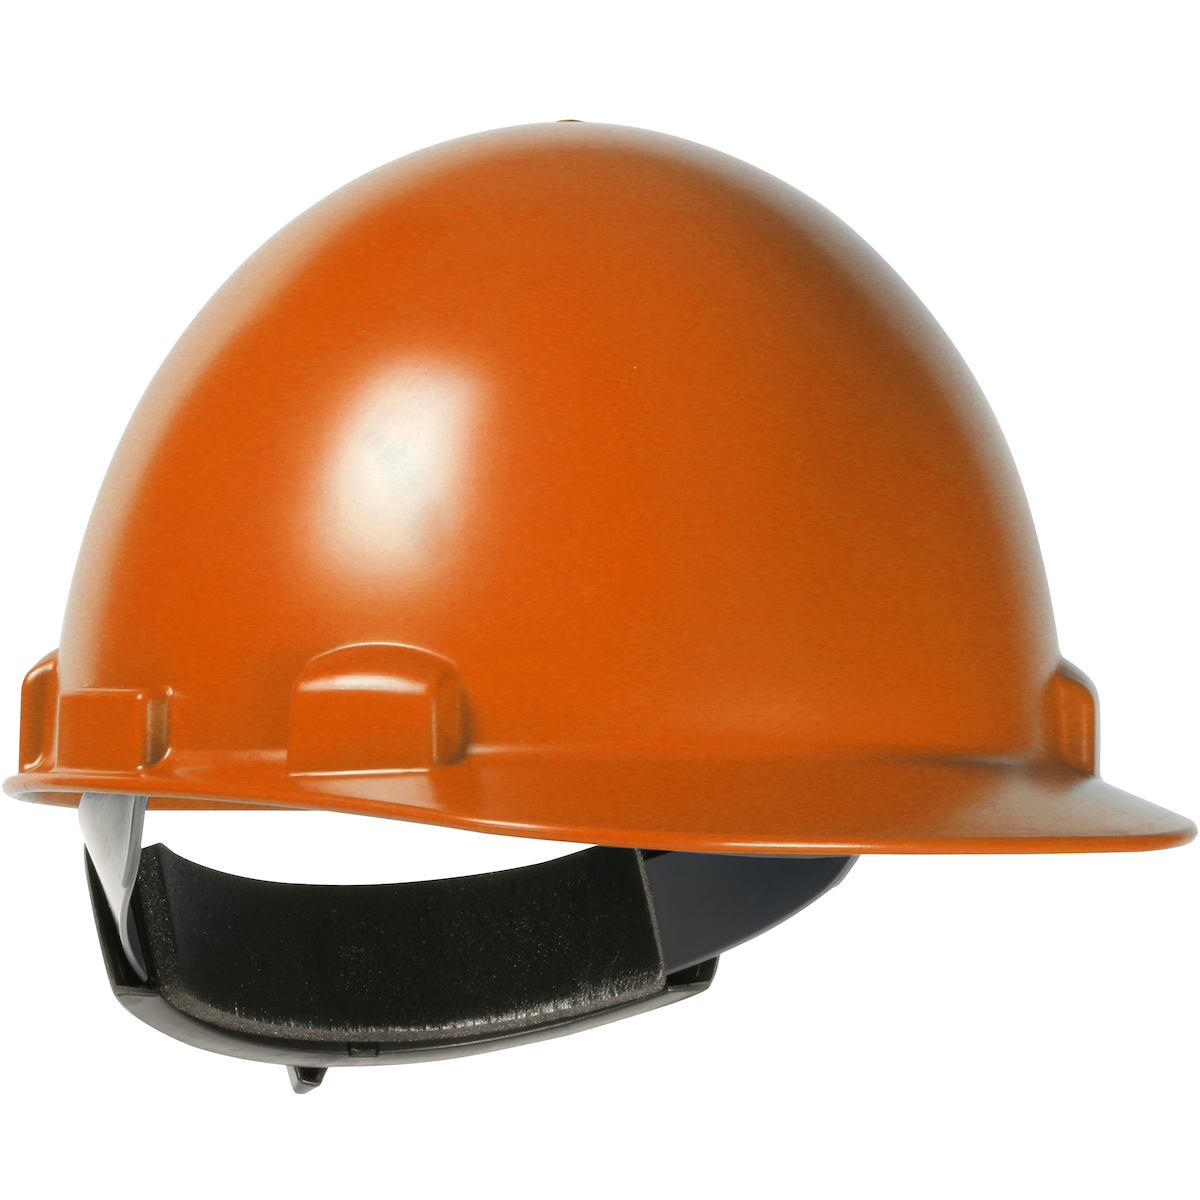 TYPE II, CAP STYLE SMOOTH DOME HARD HAT WITH ABS/POLYCARBONATE SHELL, 4-POINT TEXTILE SUSPENSION AND WHEEL RATCHET ADJUSTMENT